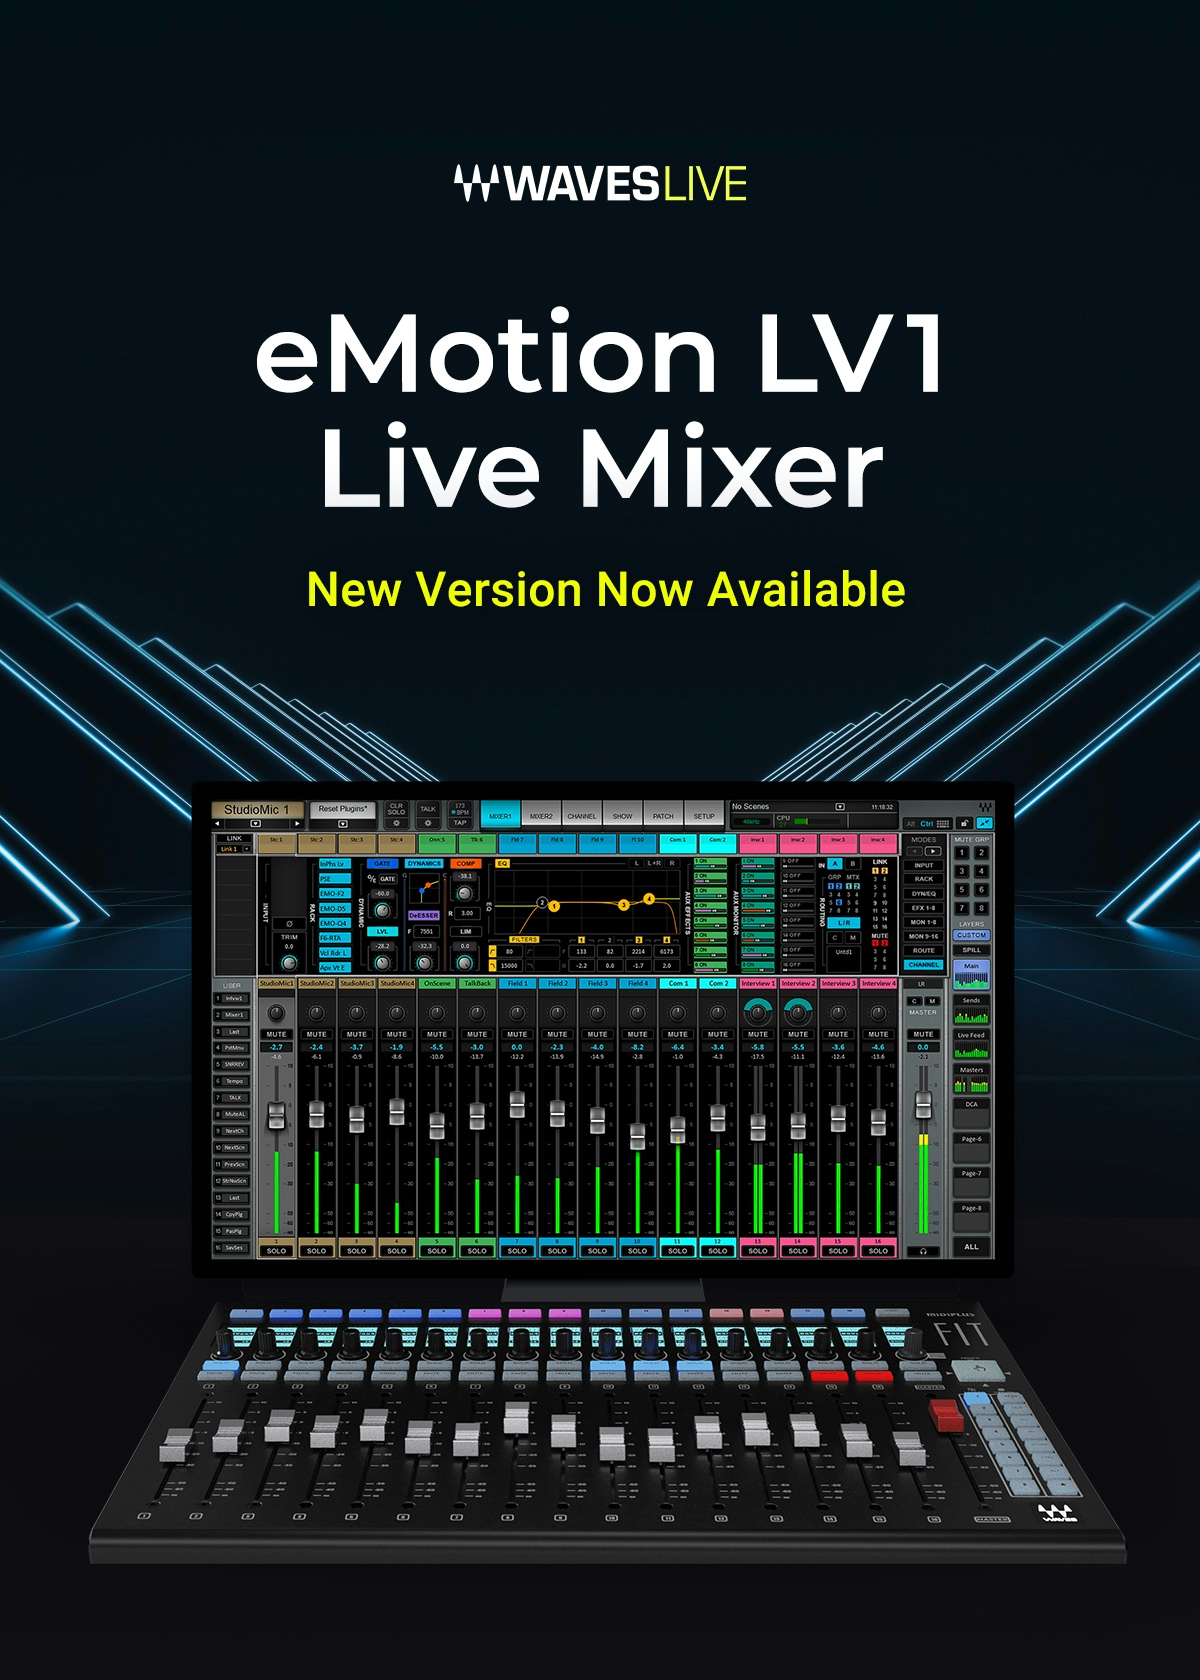 New Version of eMotion LV1 Now Available